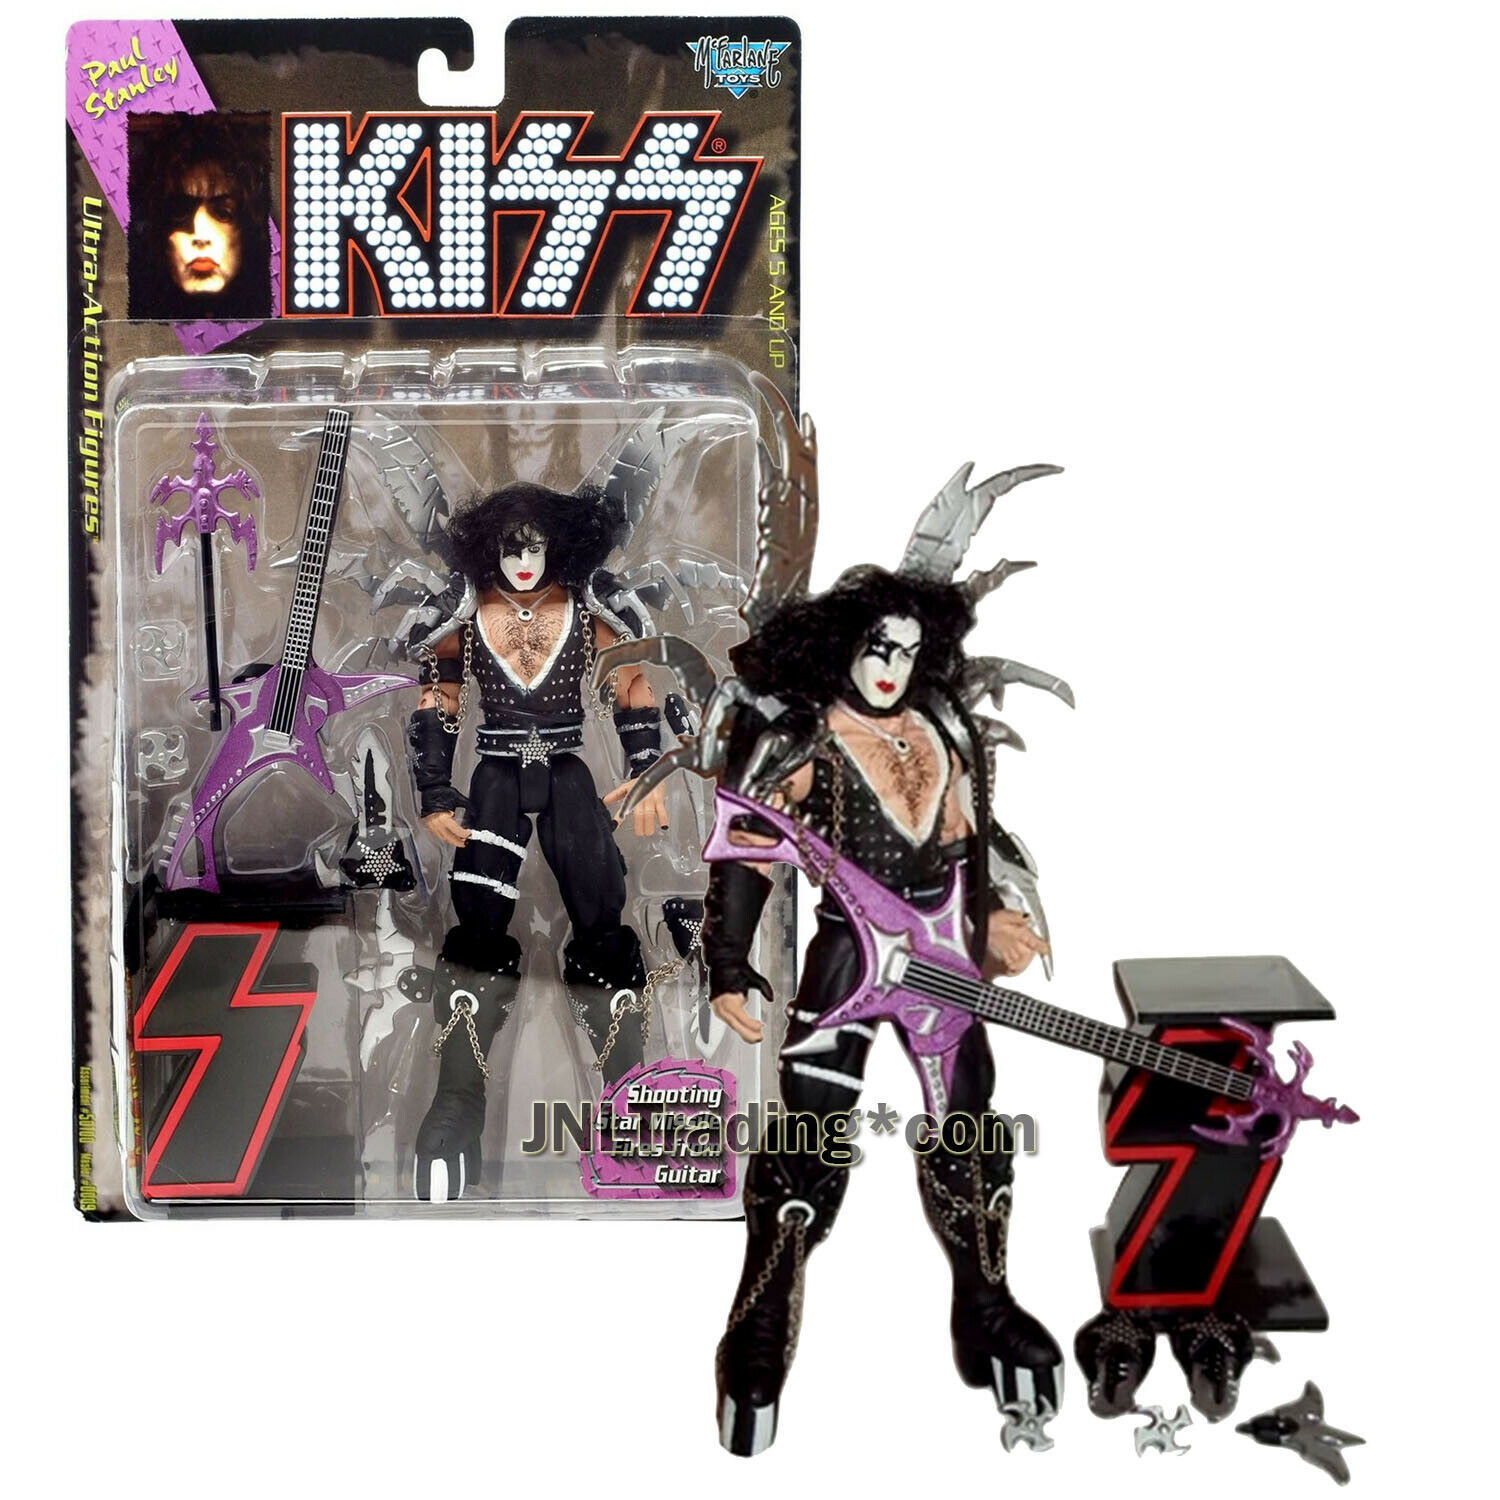 Primary image for Year 1997 McFarlane Toys KISS Series 7 Inch Ultra Action Figure - PAUL STANLEY